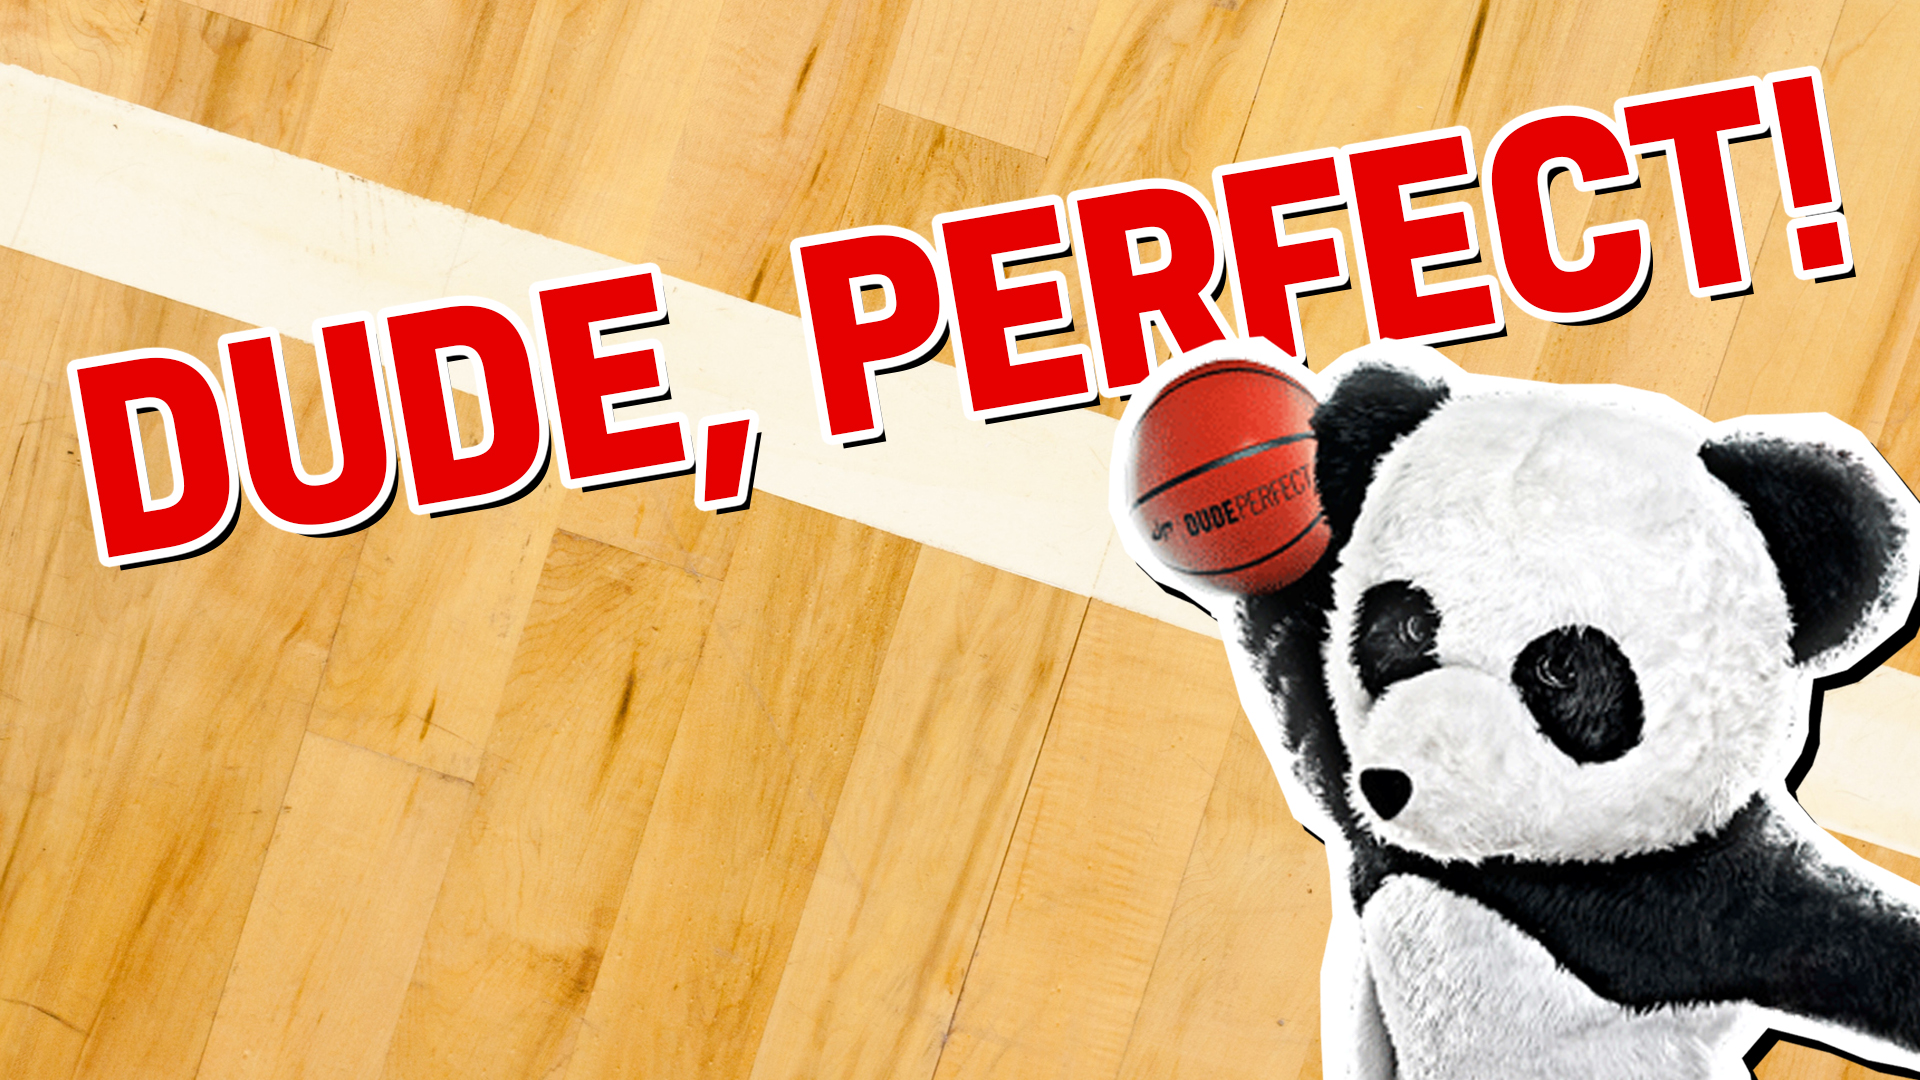 The Dude Perfect Panda says your result is a total slam dunk!